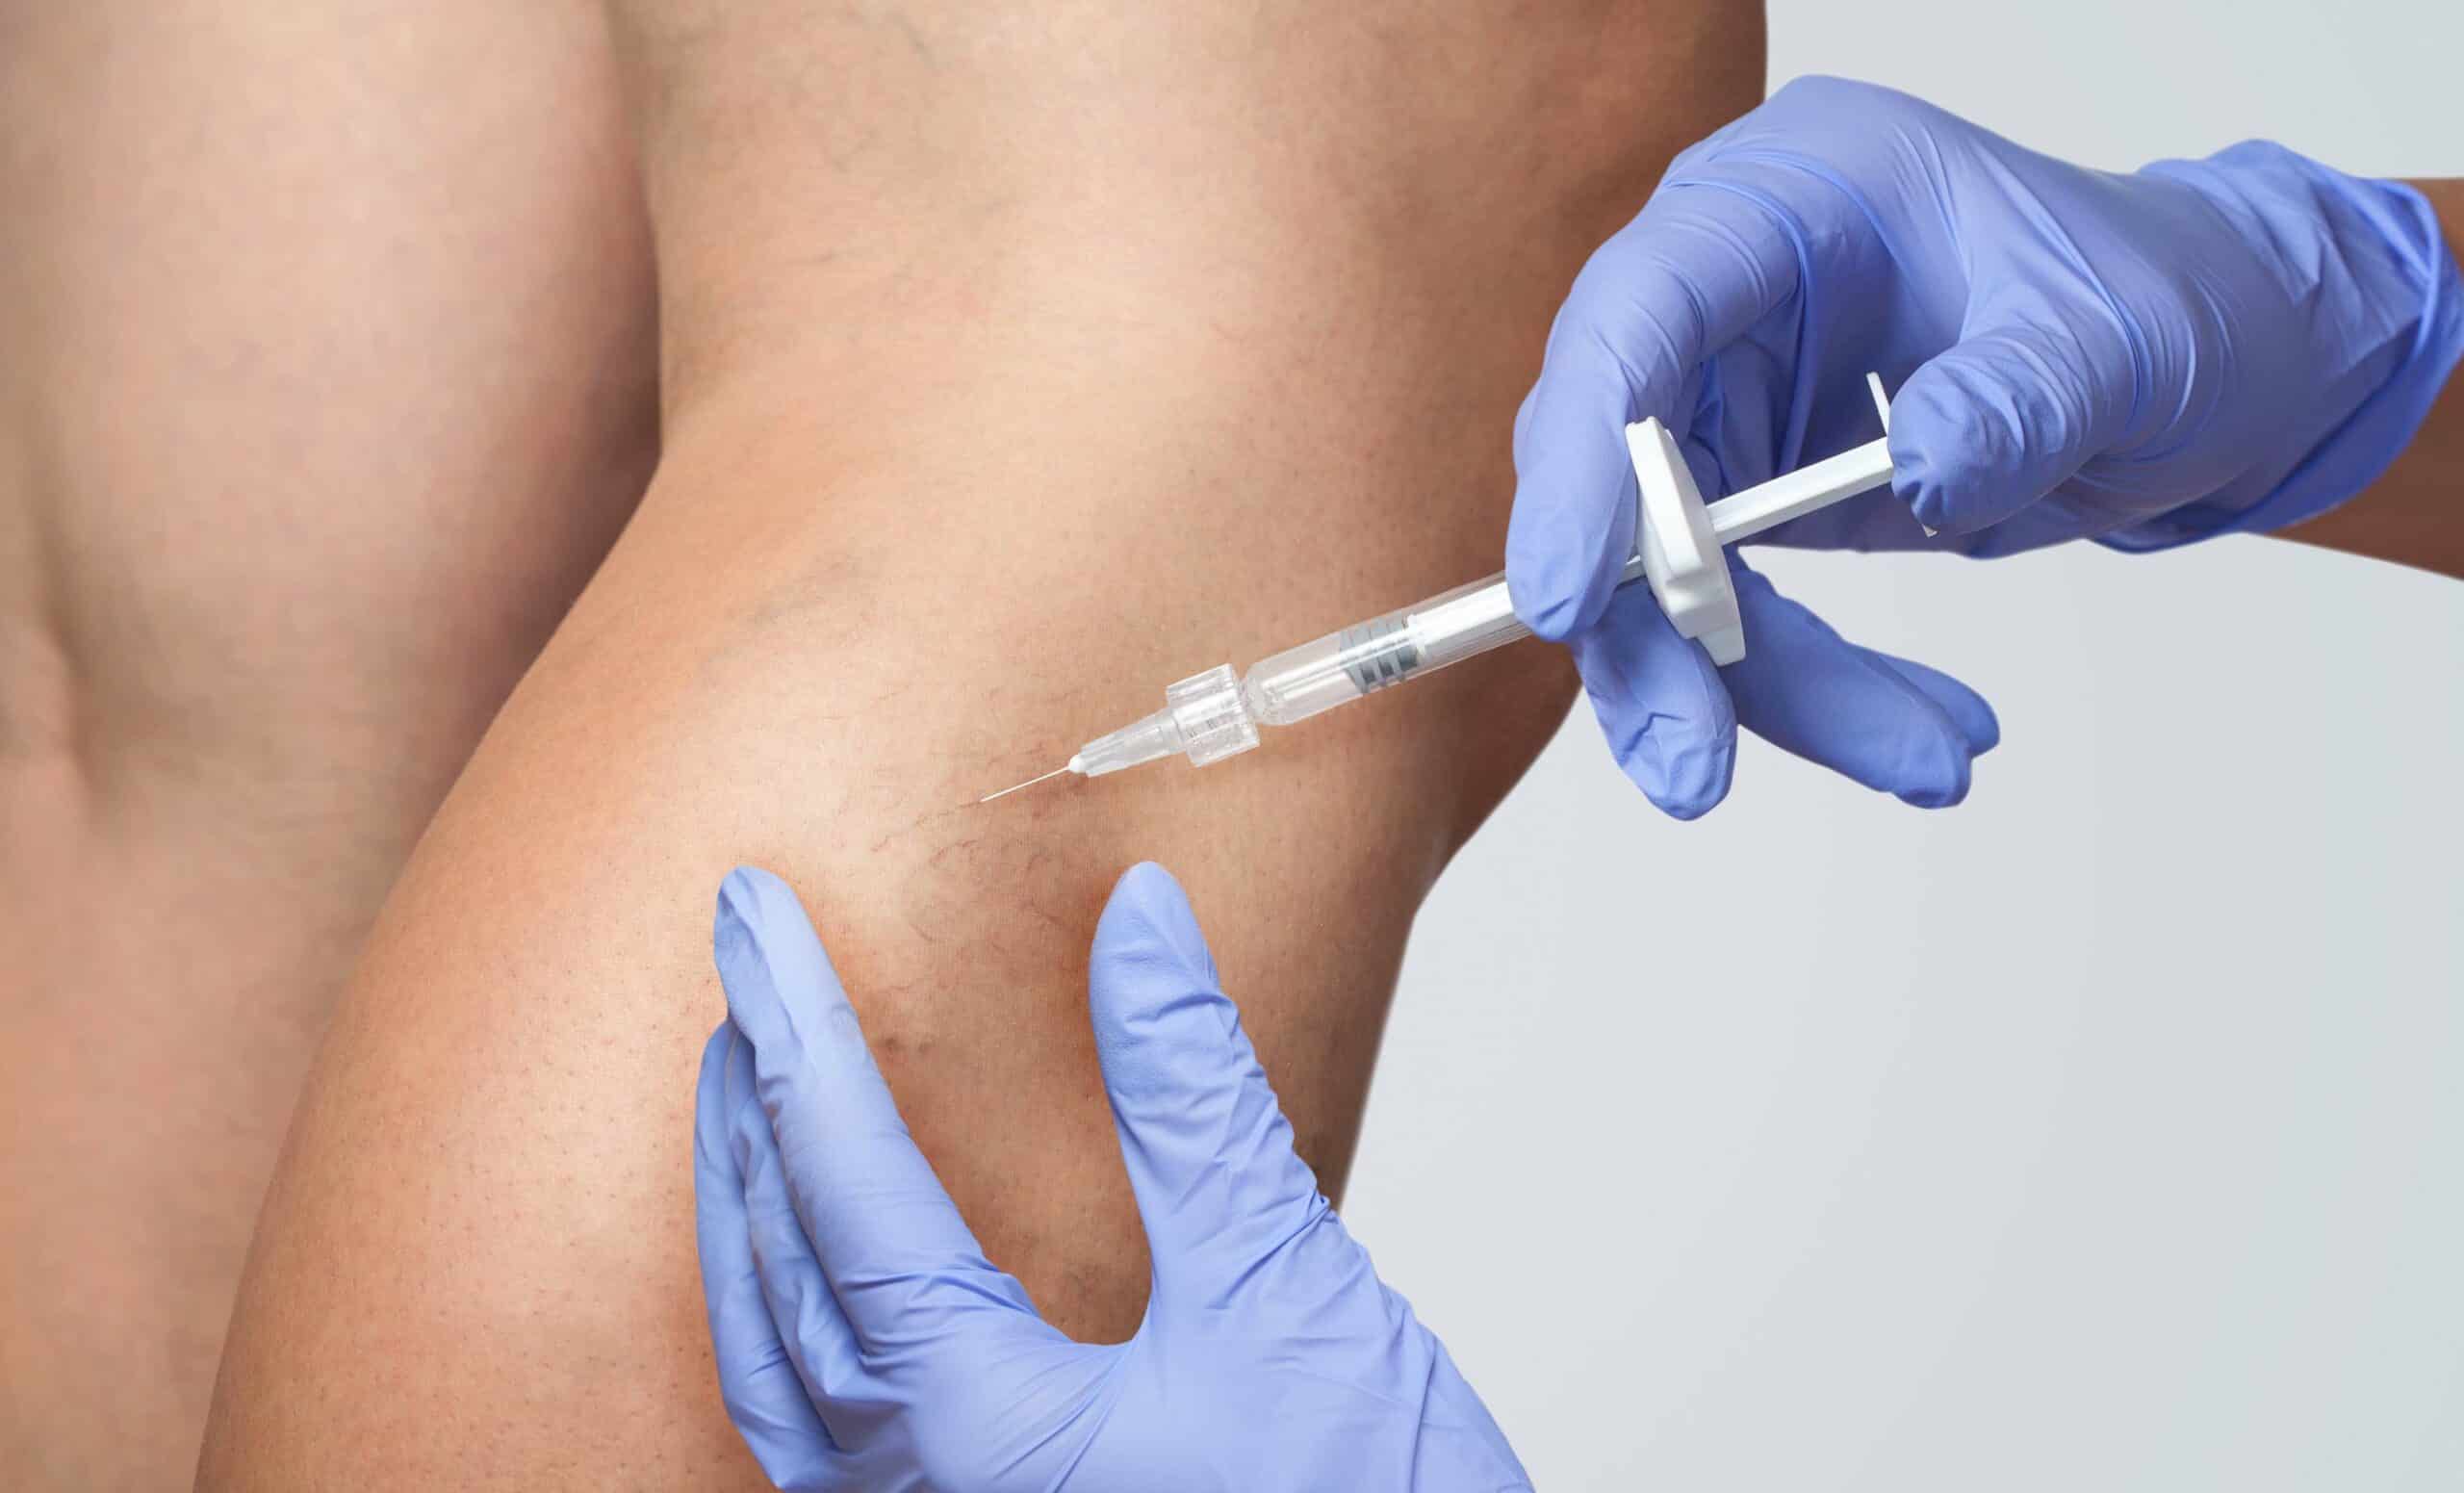 Sclerotherapy Injection | Epiphany Medspa & Wellness Fullerton, CA